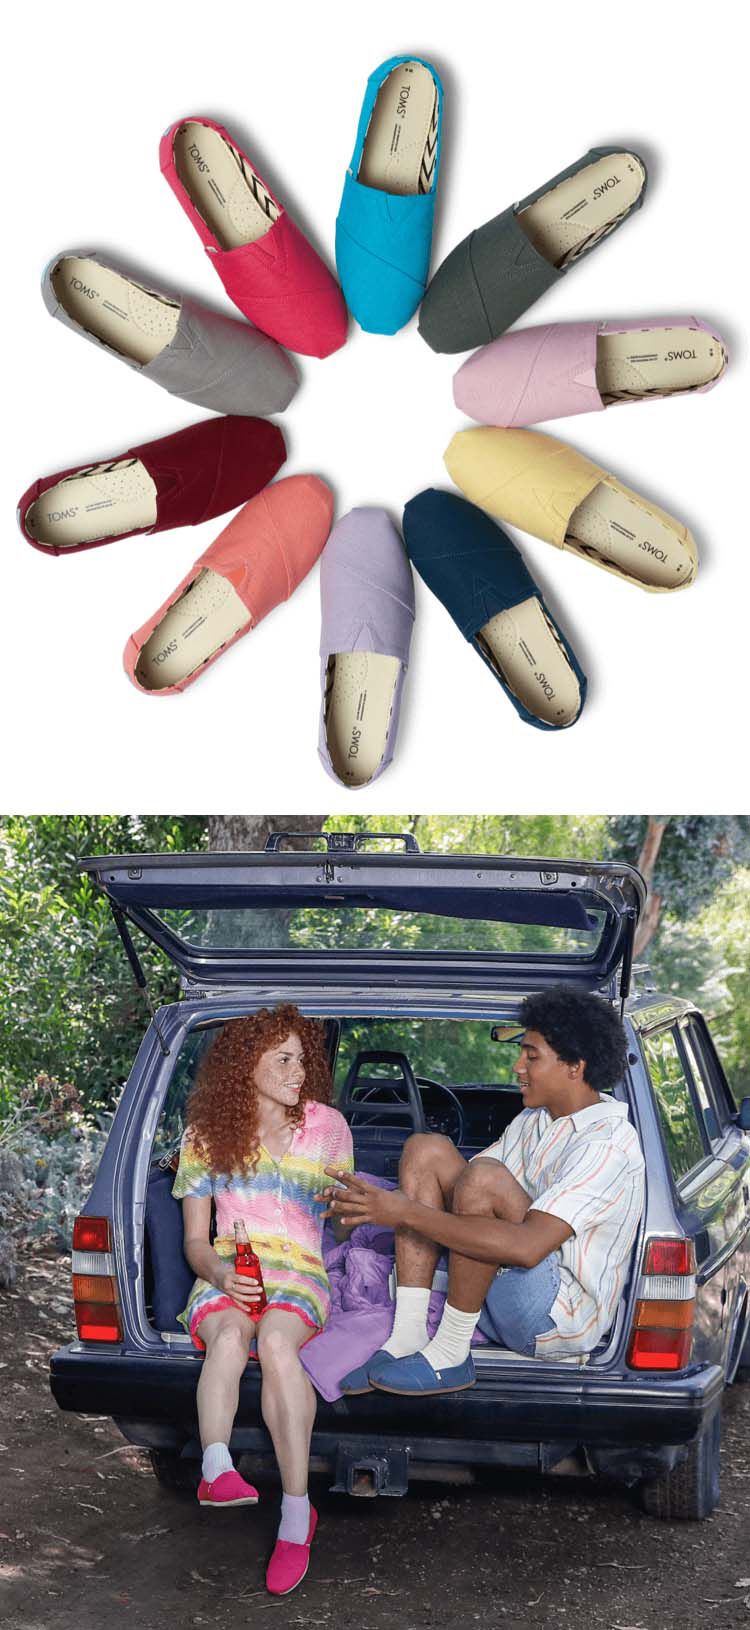 Birds-eye view of Alpargatas in a variety of color ways. A girl and boy sitting in the truck of a car. 